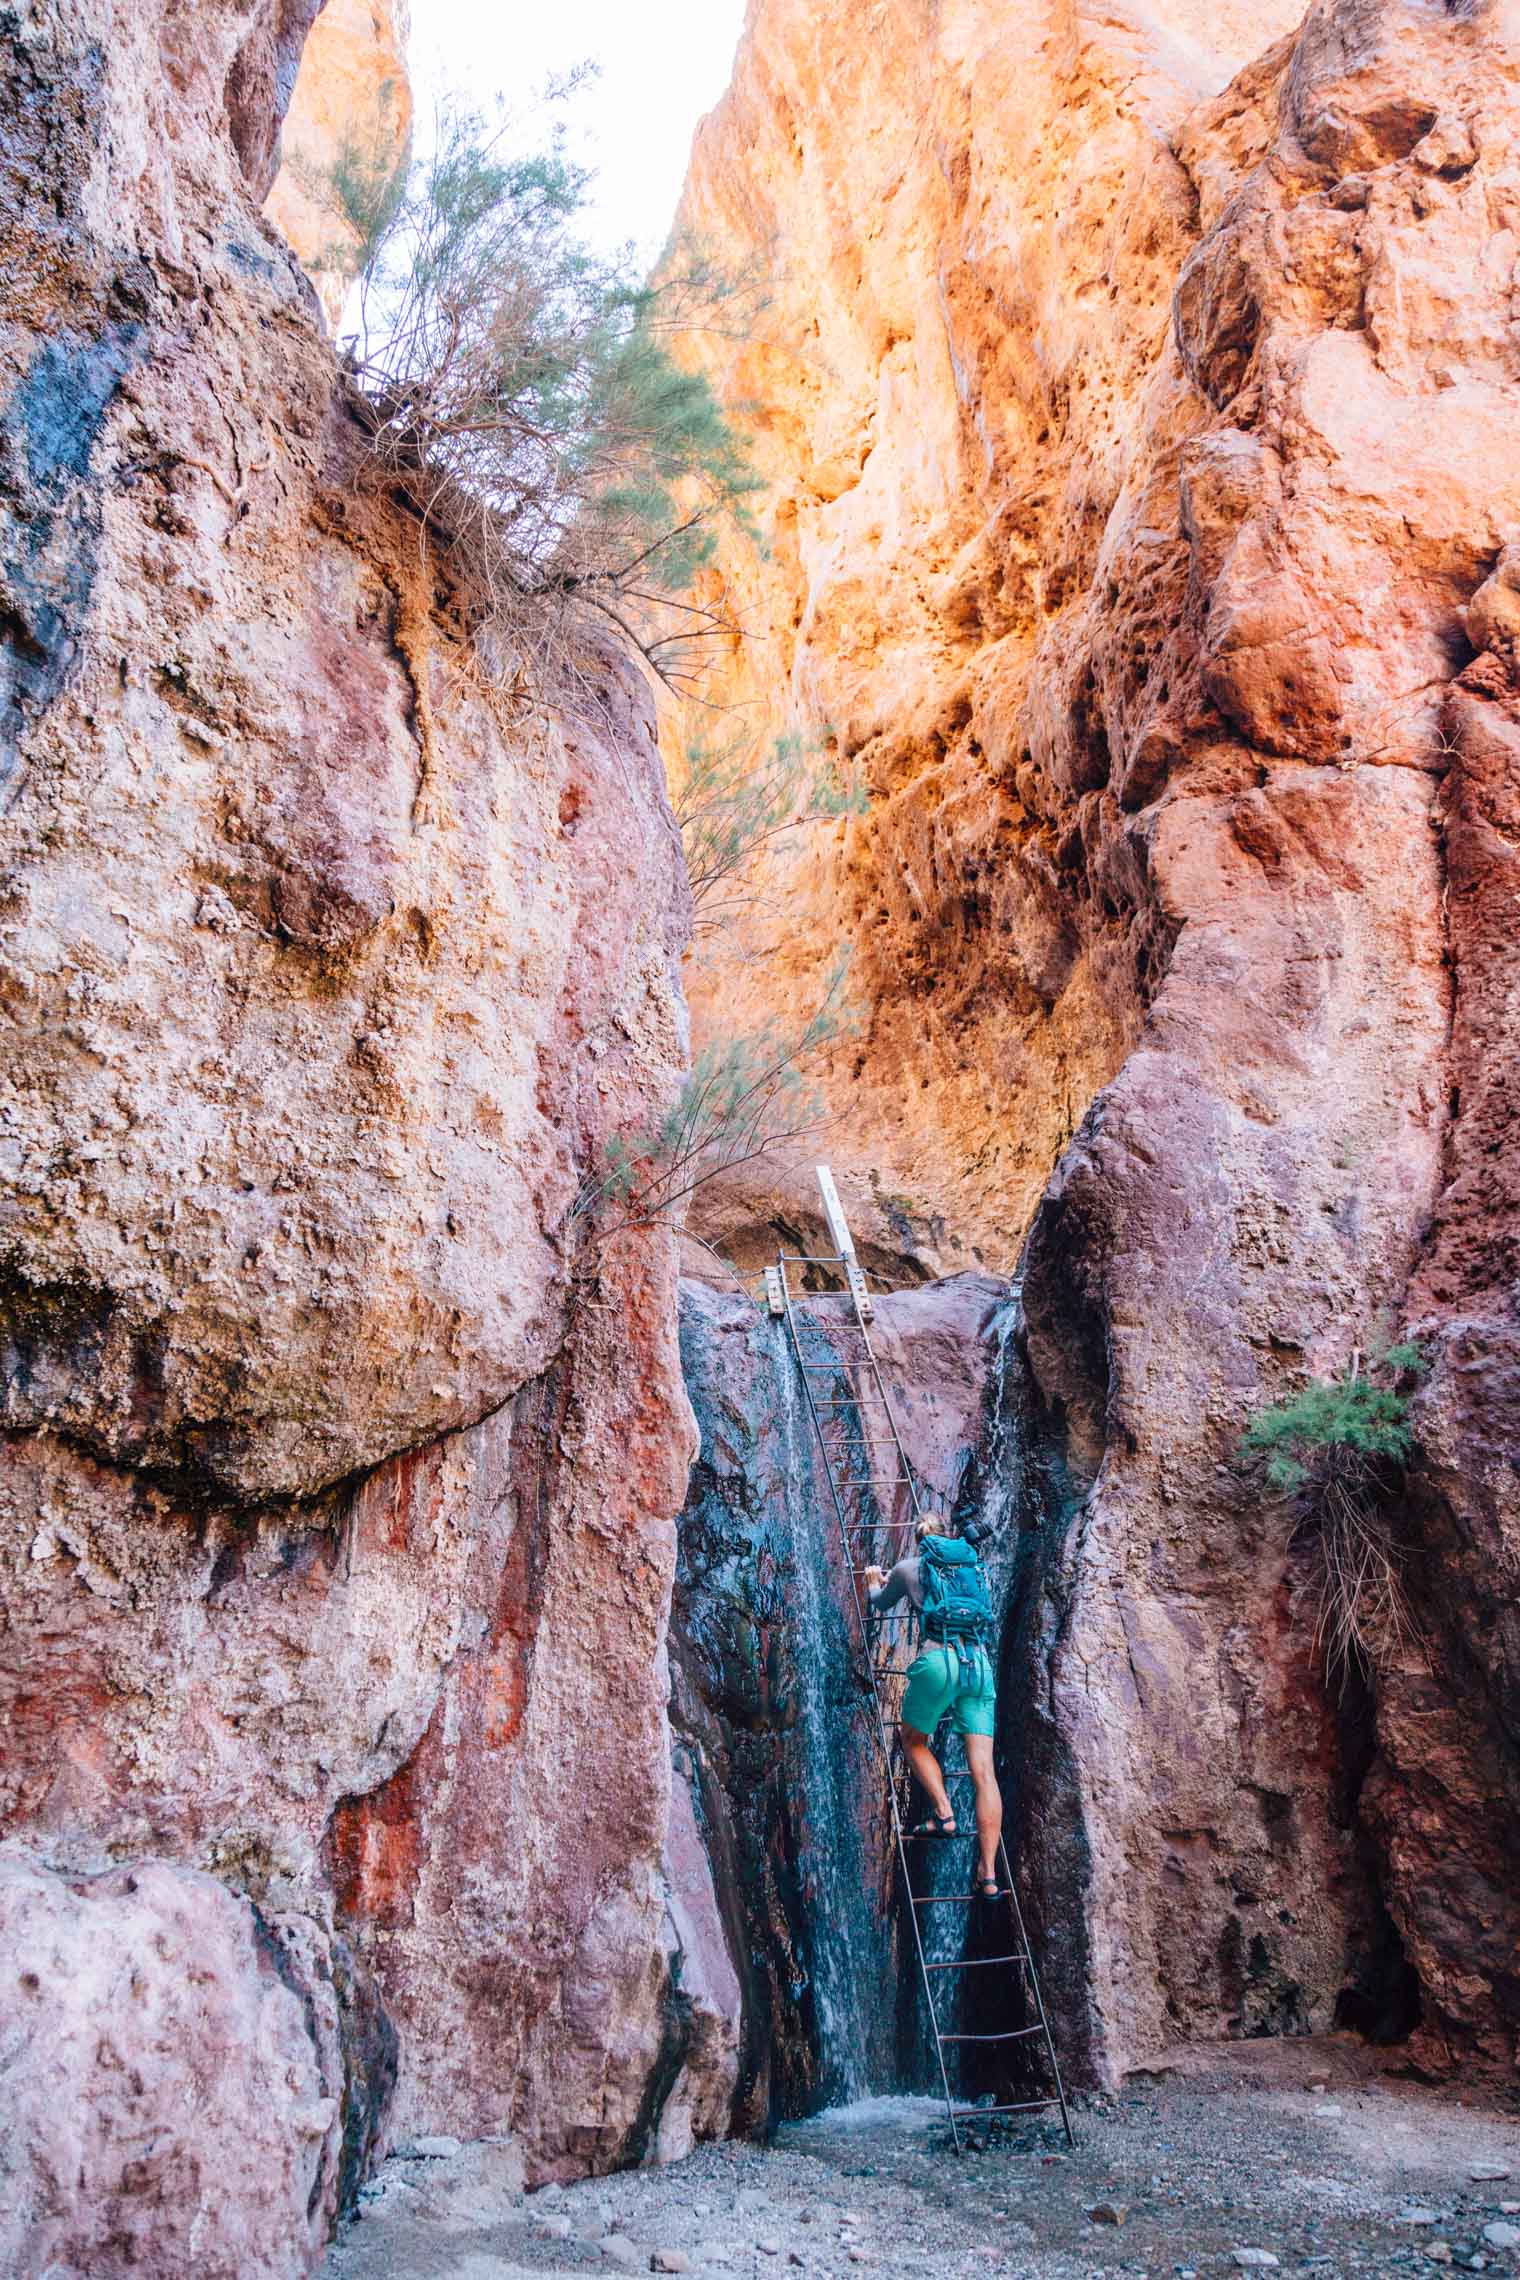 Michael climbing up a ladder in a slot canyon